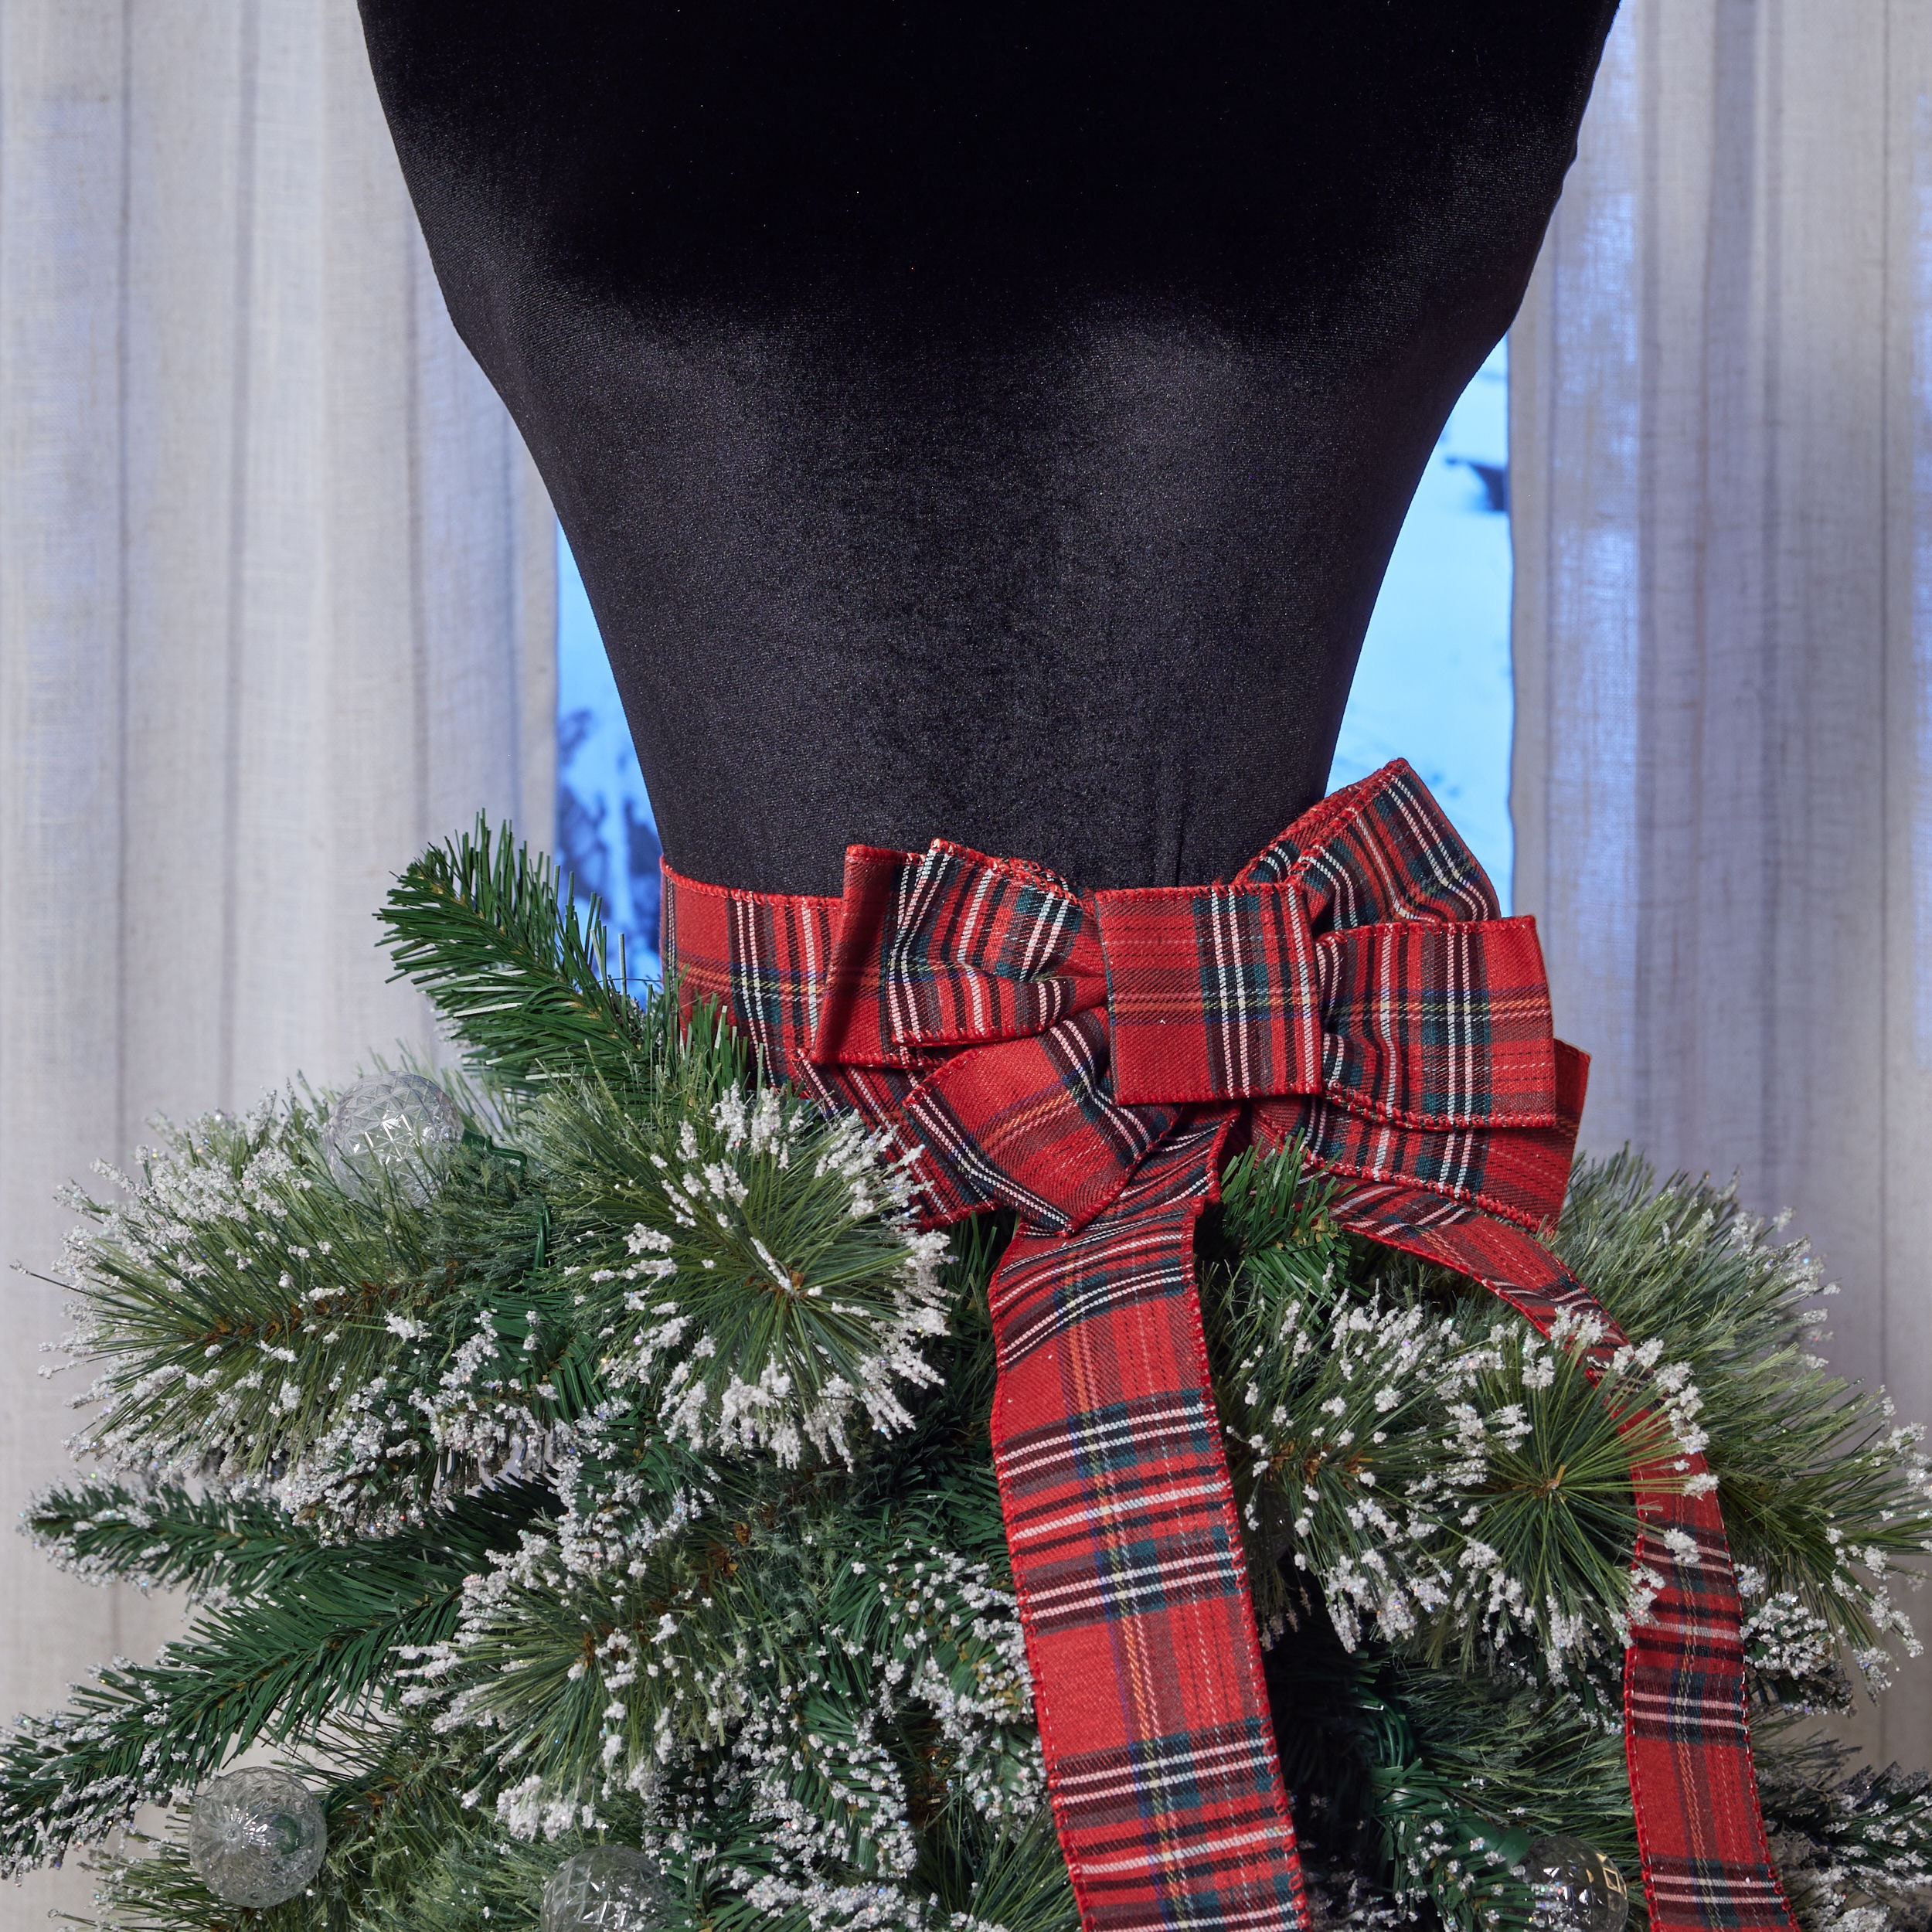 Mannequin Christmas Tree Dress of my Dreams